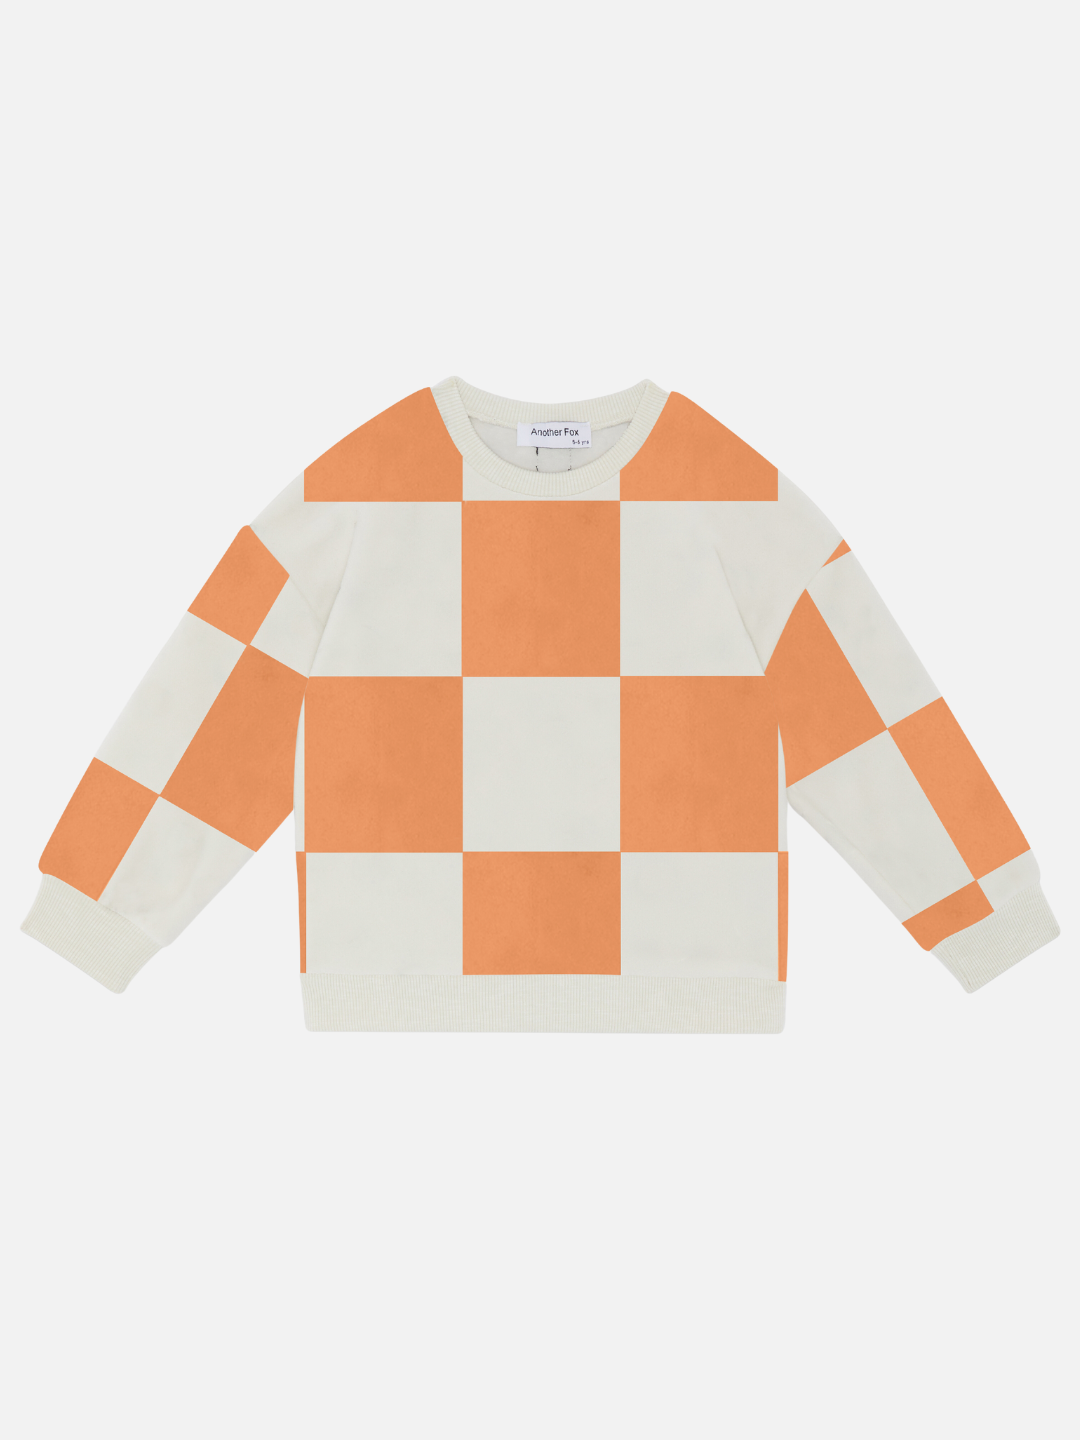 A kids' sweatshirt in a bold apricot and white checkerboard pattern